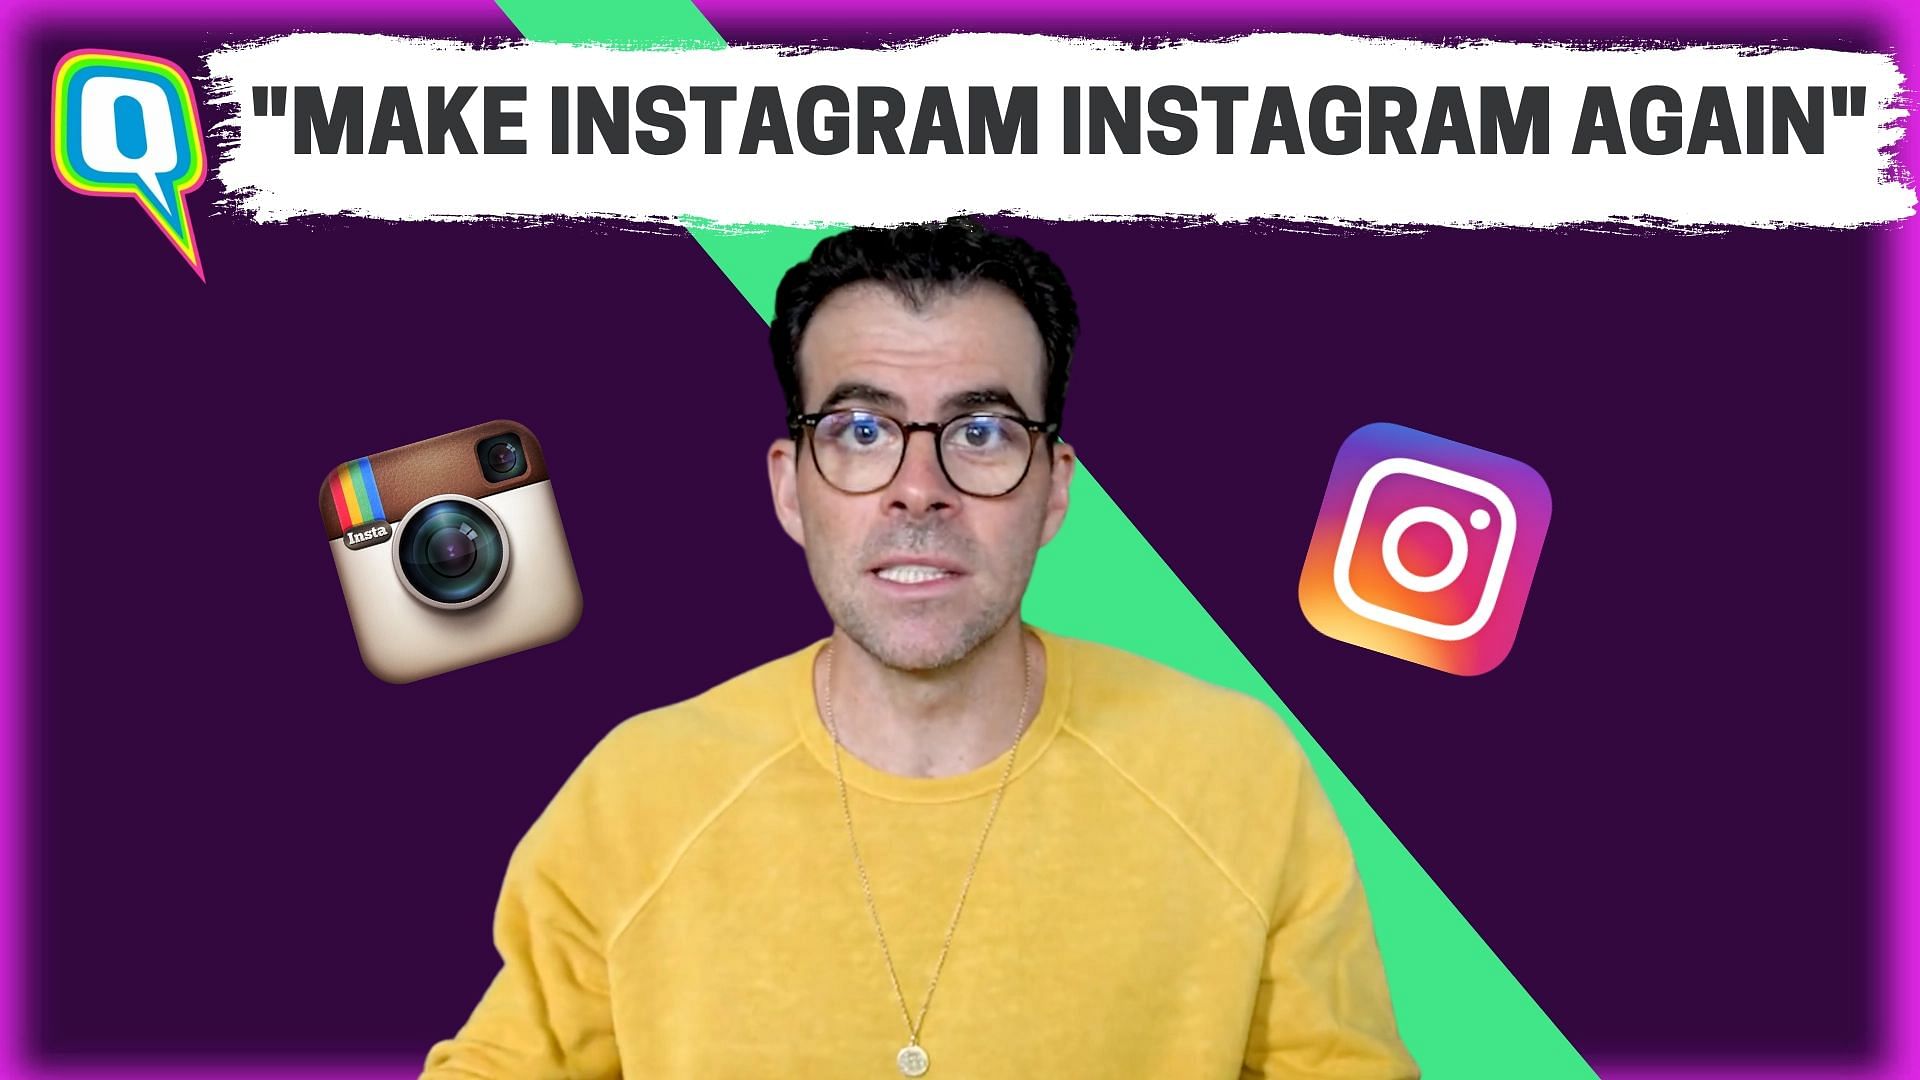 <div class="paragraphs"><p>Make Instagram Instagram Again trends online as users displeased with app's new changes.</p></div>